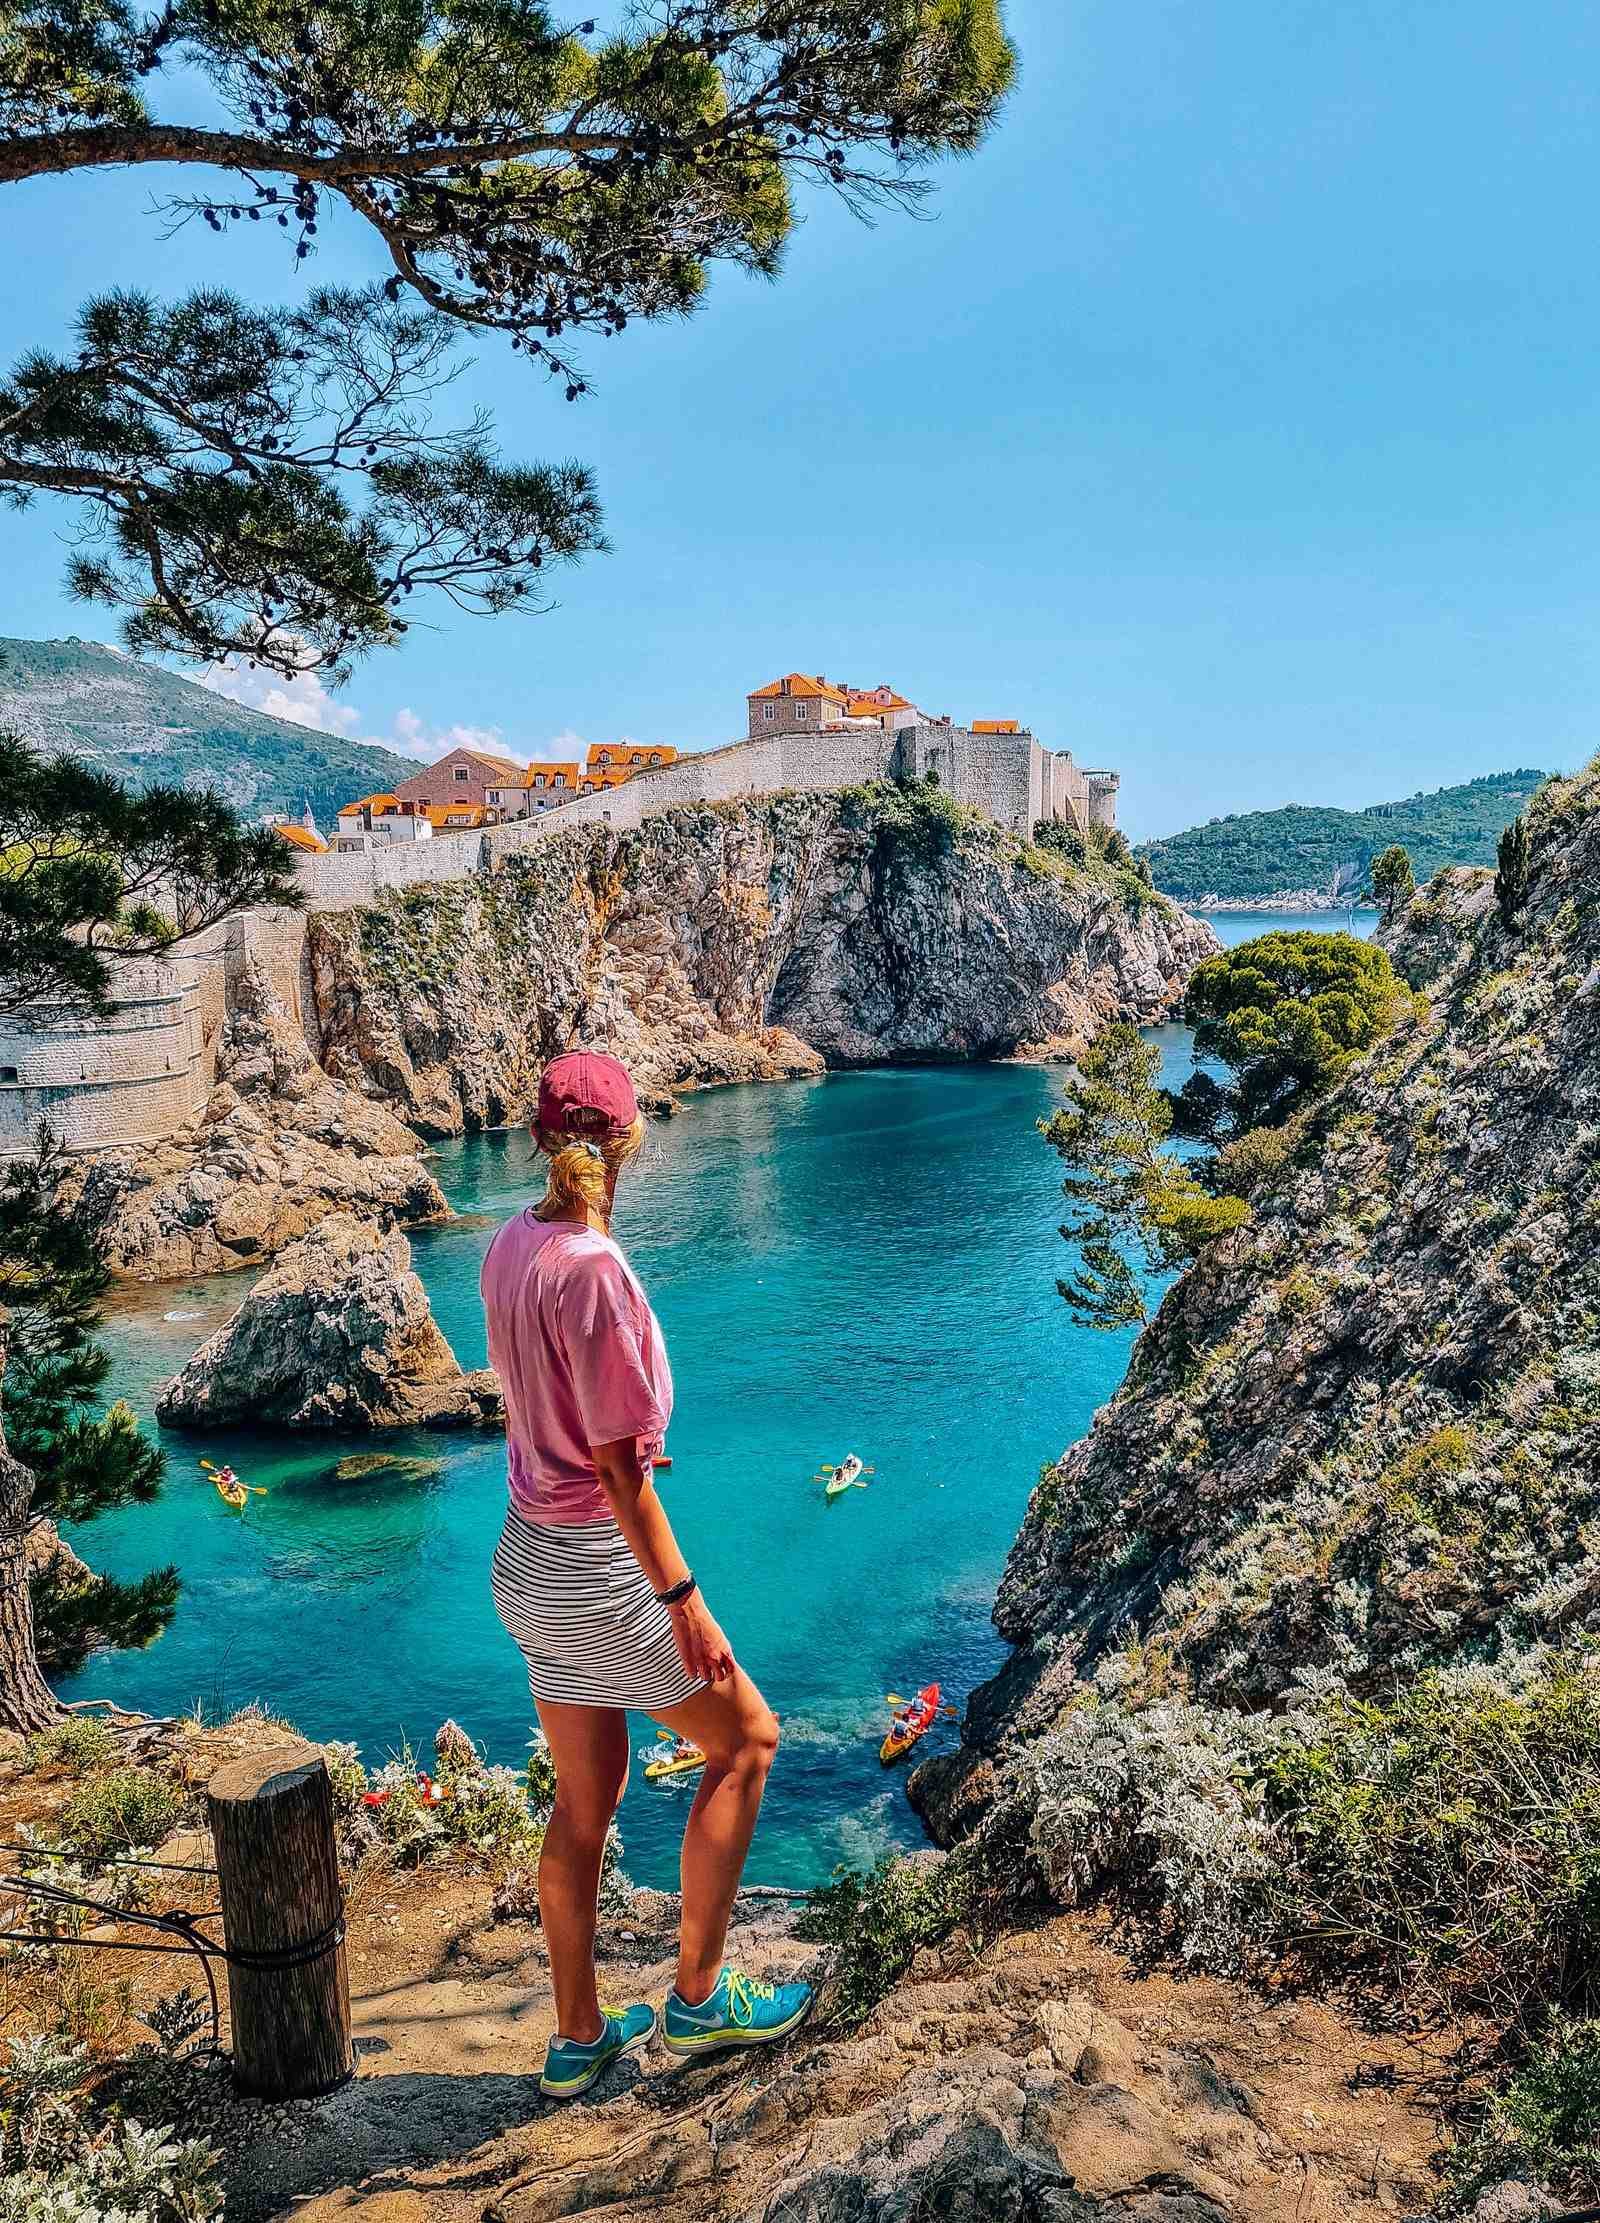 A girl in a pink shirt standing alongside a cliff with blue water and the walled old town of Dubrovnik along a cliff in the distance